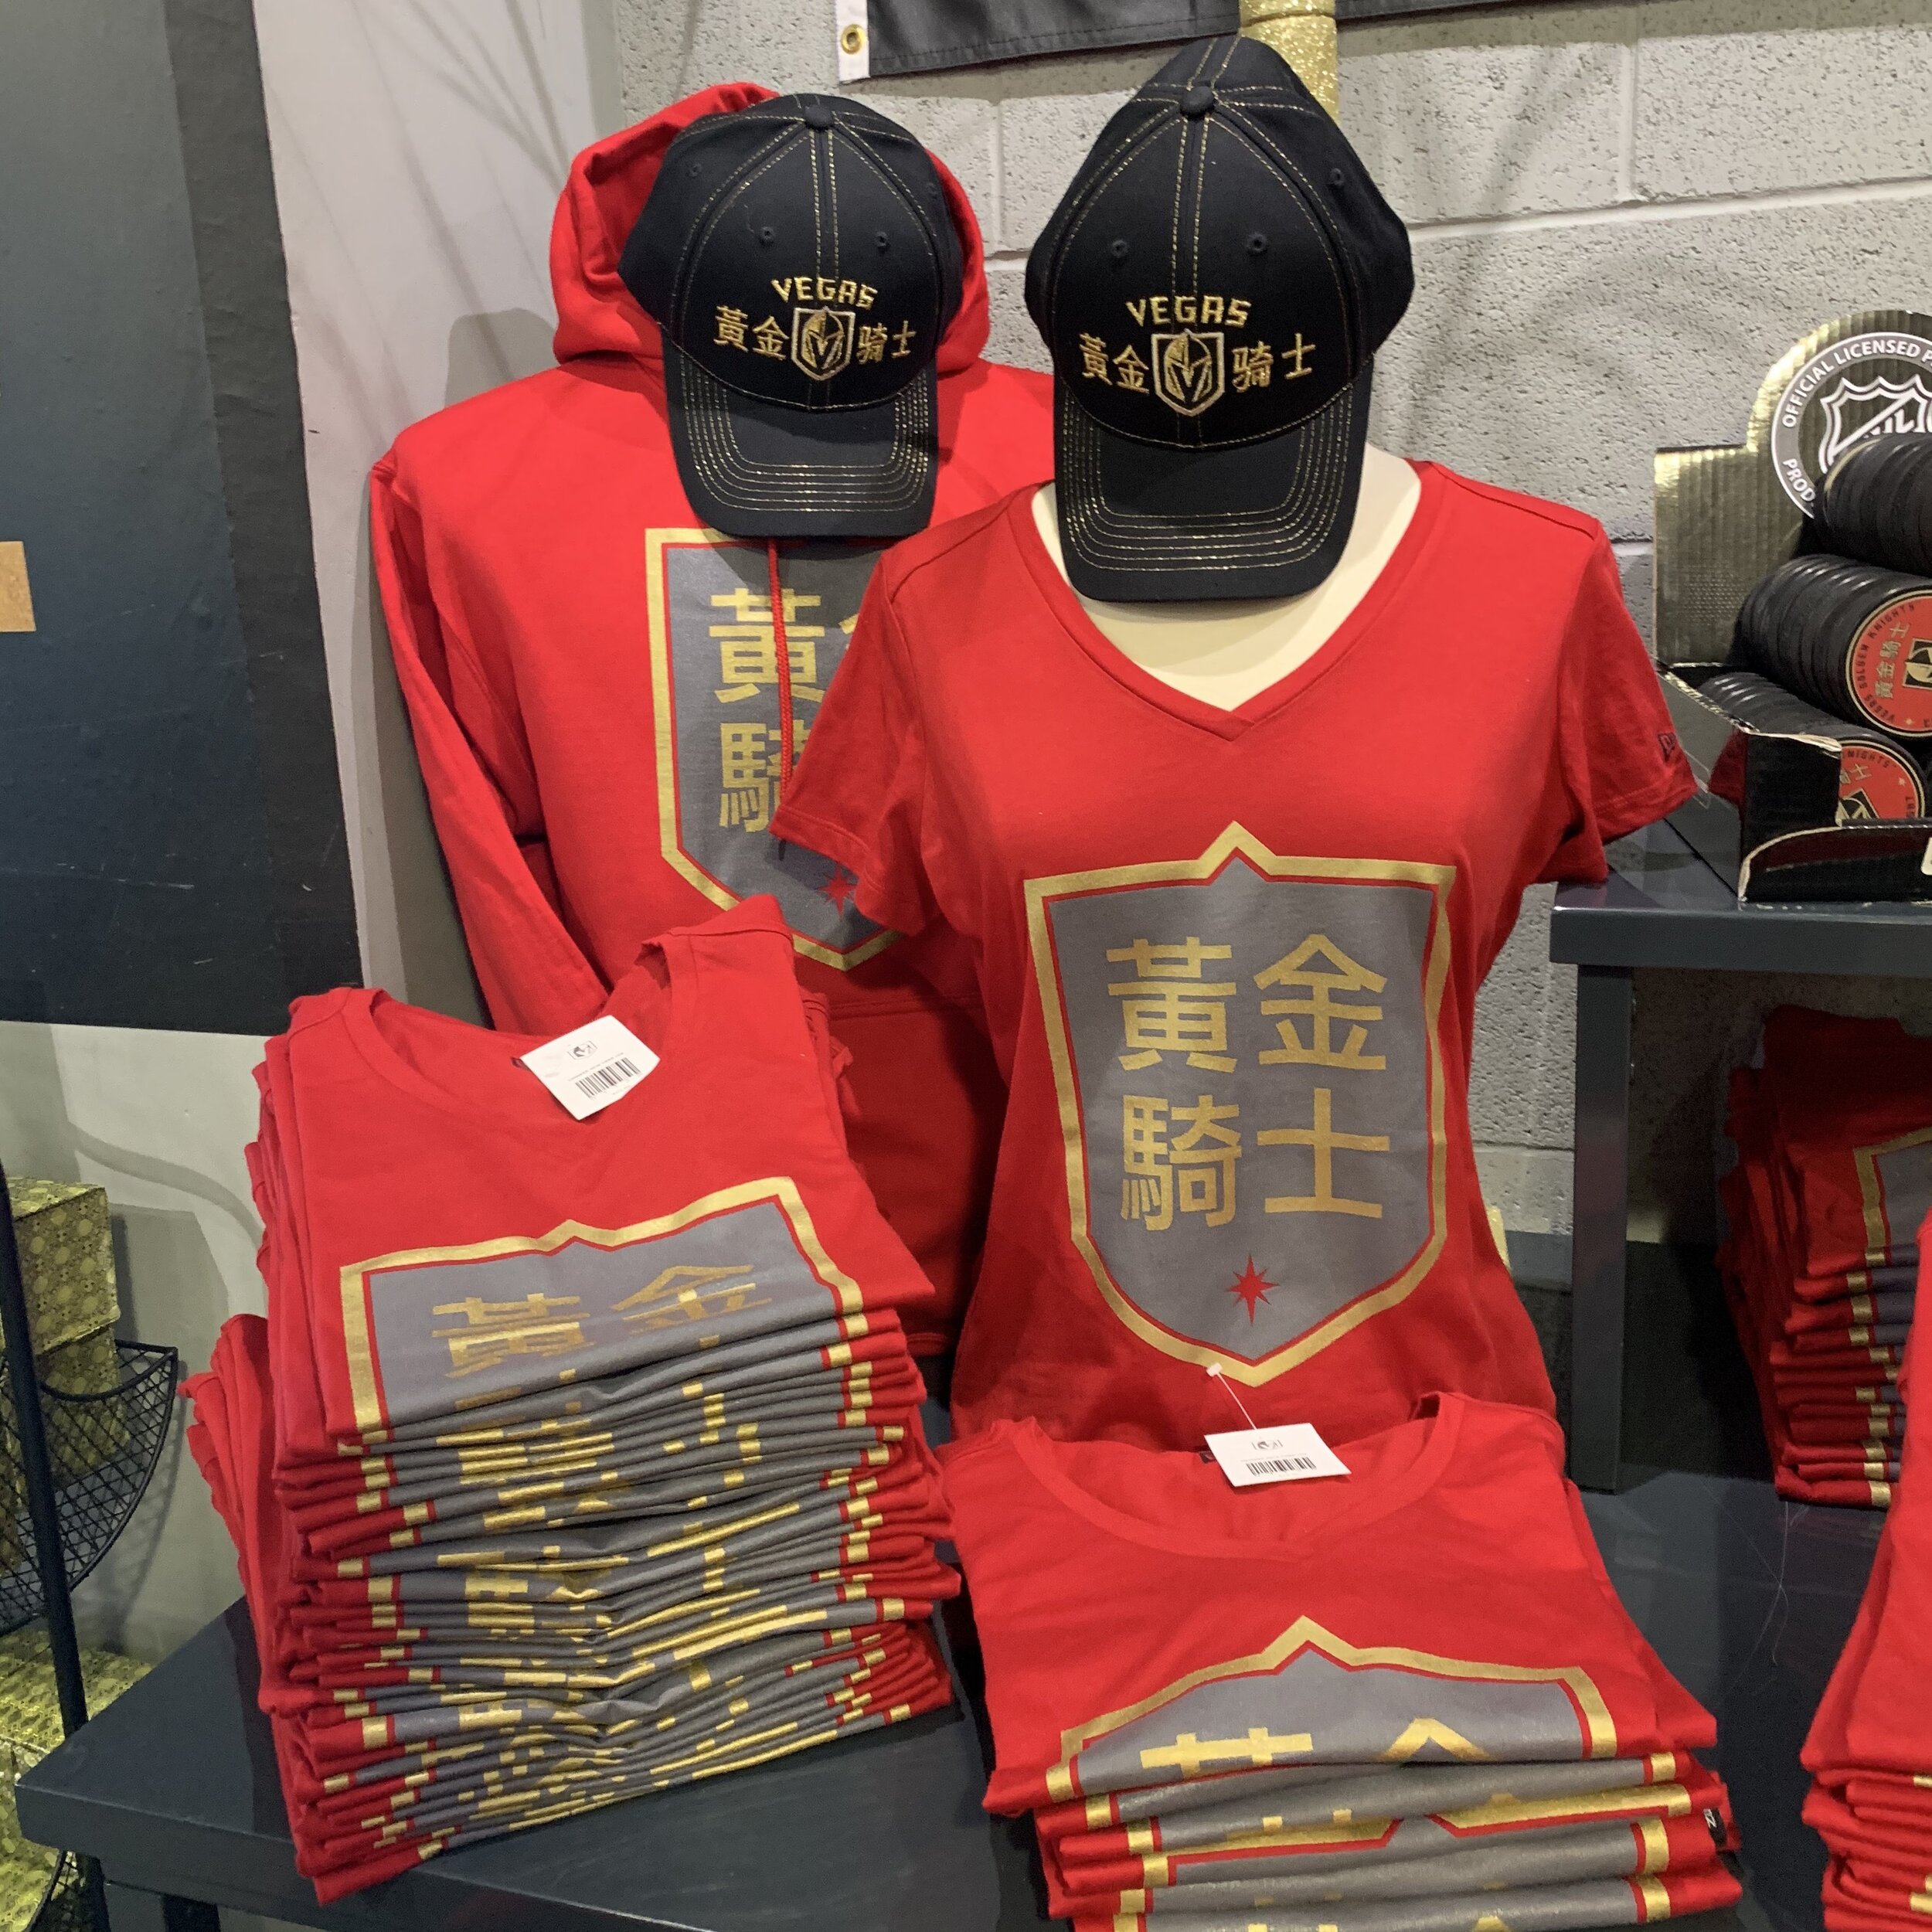 Vegas Golden Knights celebrate Chinese New Year with special